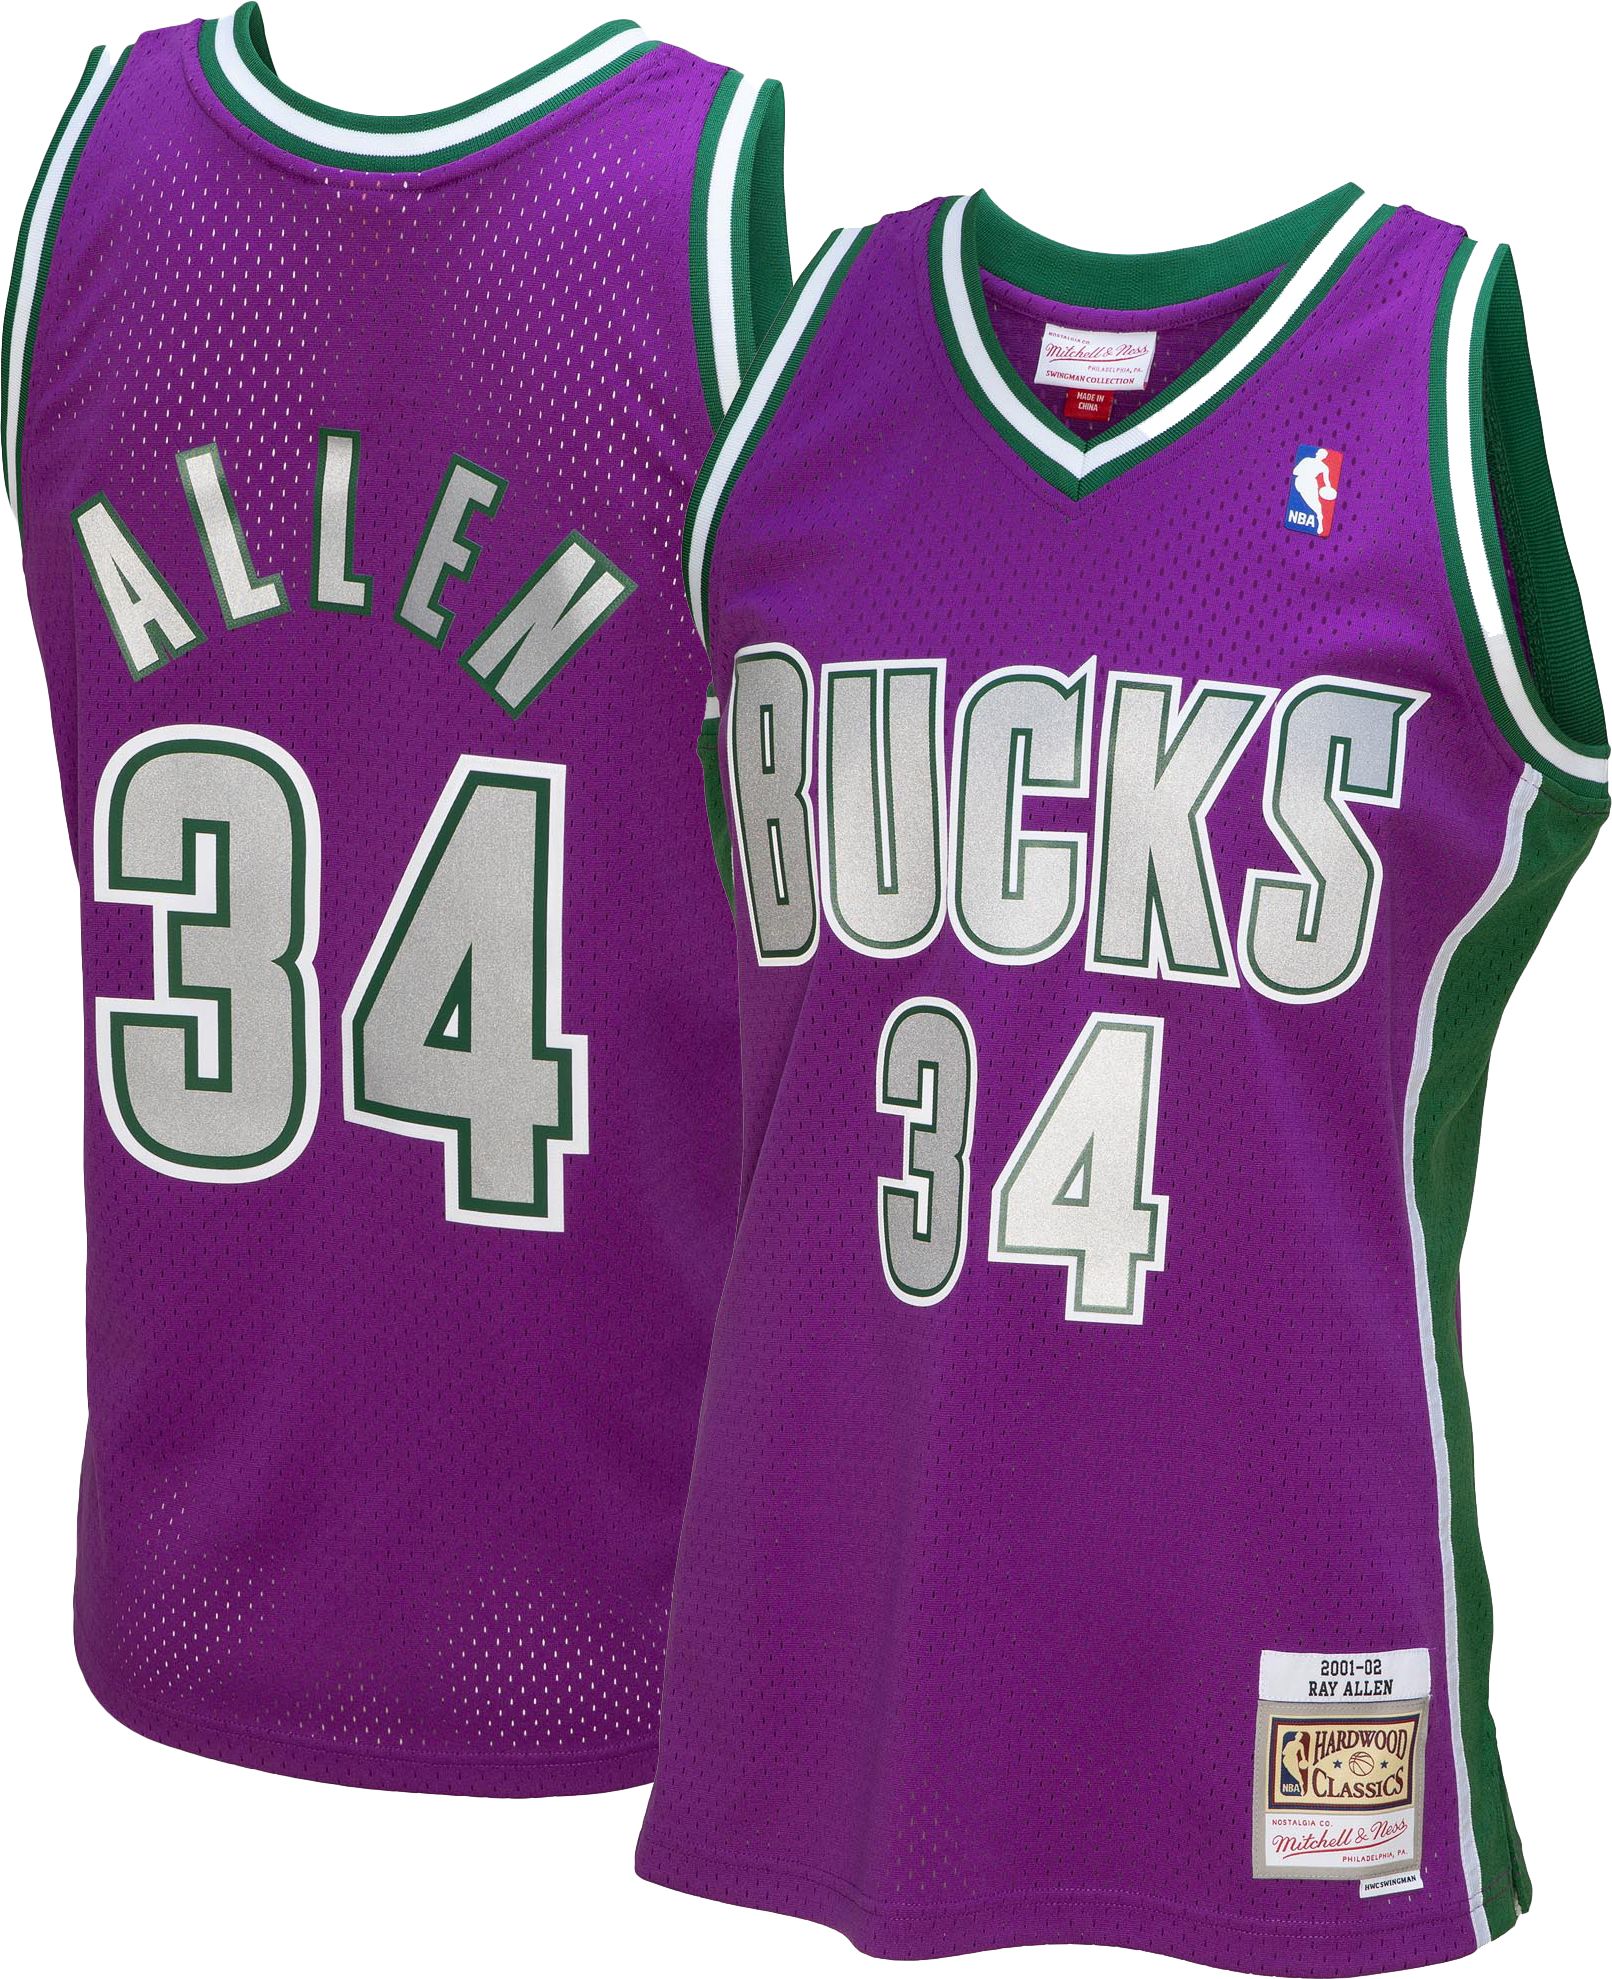 NBA Mens Small Stitched Jersey- Giannis Antetokounmpo #34 Milwaukee Bucks  for Sale in Avon, IN - OfferUp